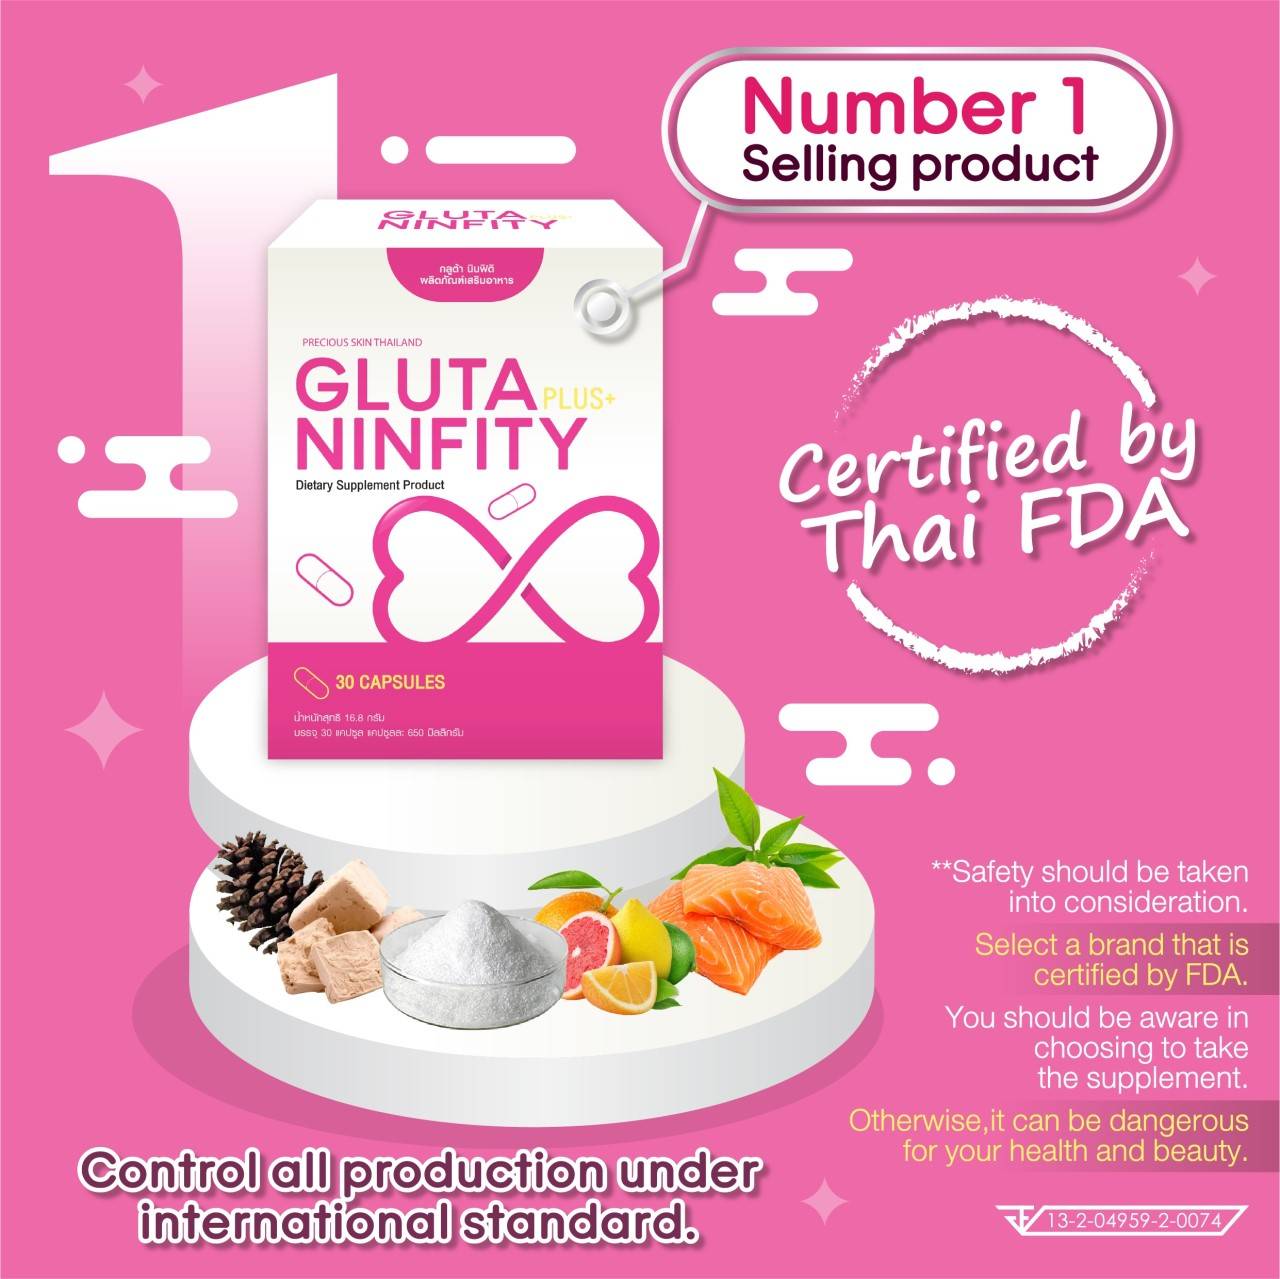 NEW GLUTA NINFITY PLUS+ 900,000 mg (NANO PLUS+) WHITE COLLAGEN Q10 ANTI-AGING AND V-SHAPE FACE STRAWBERRY EXTRACT WHITENING by "www.ccthaitown.com"